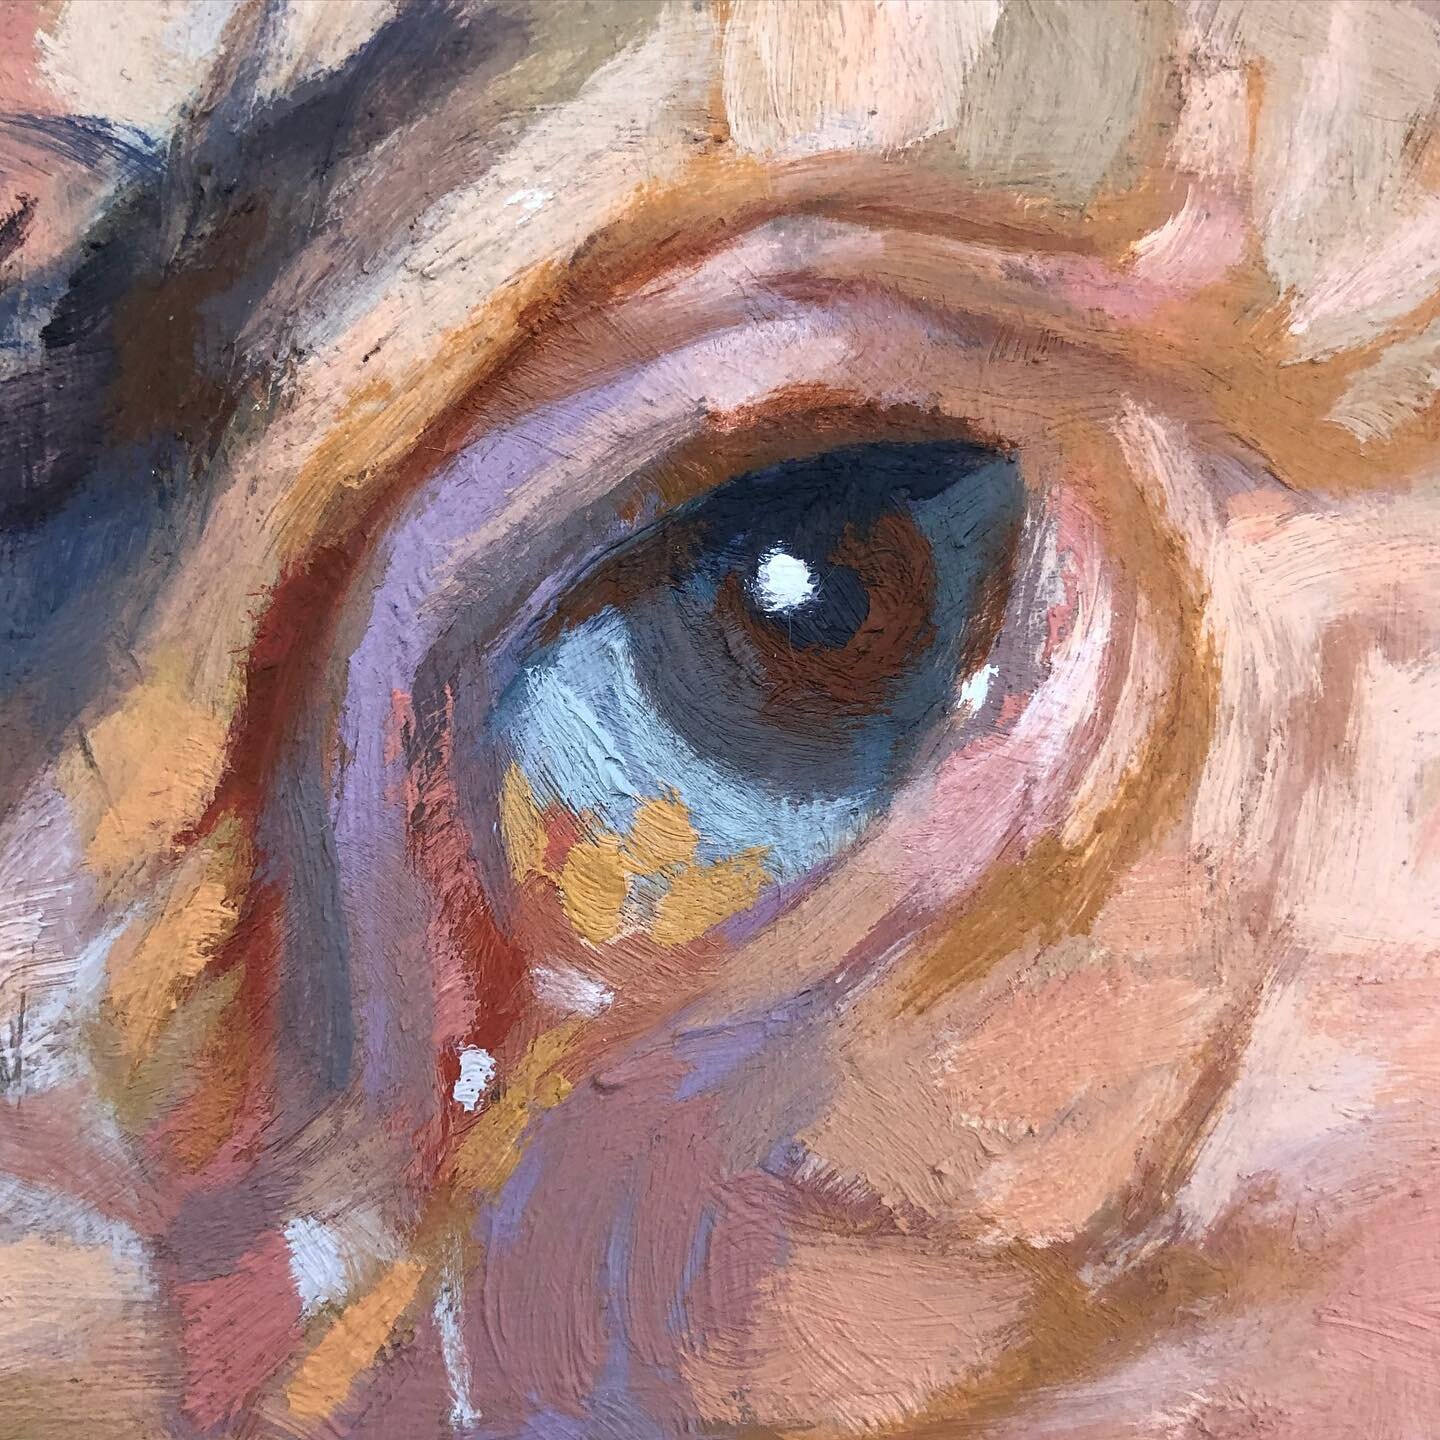 Some eye close ups for your brushmark delectation. Nothing minimalist here folks! #coldwaxmedium #irishartistsofinstagram #oilpainting #eyeart #coldwaxportrait